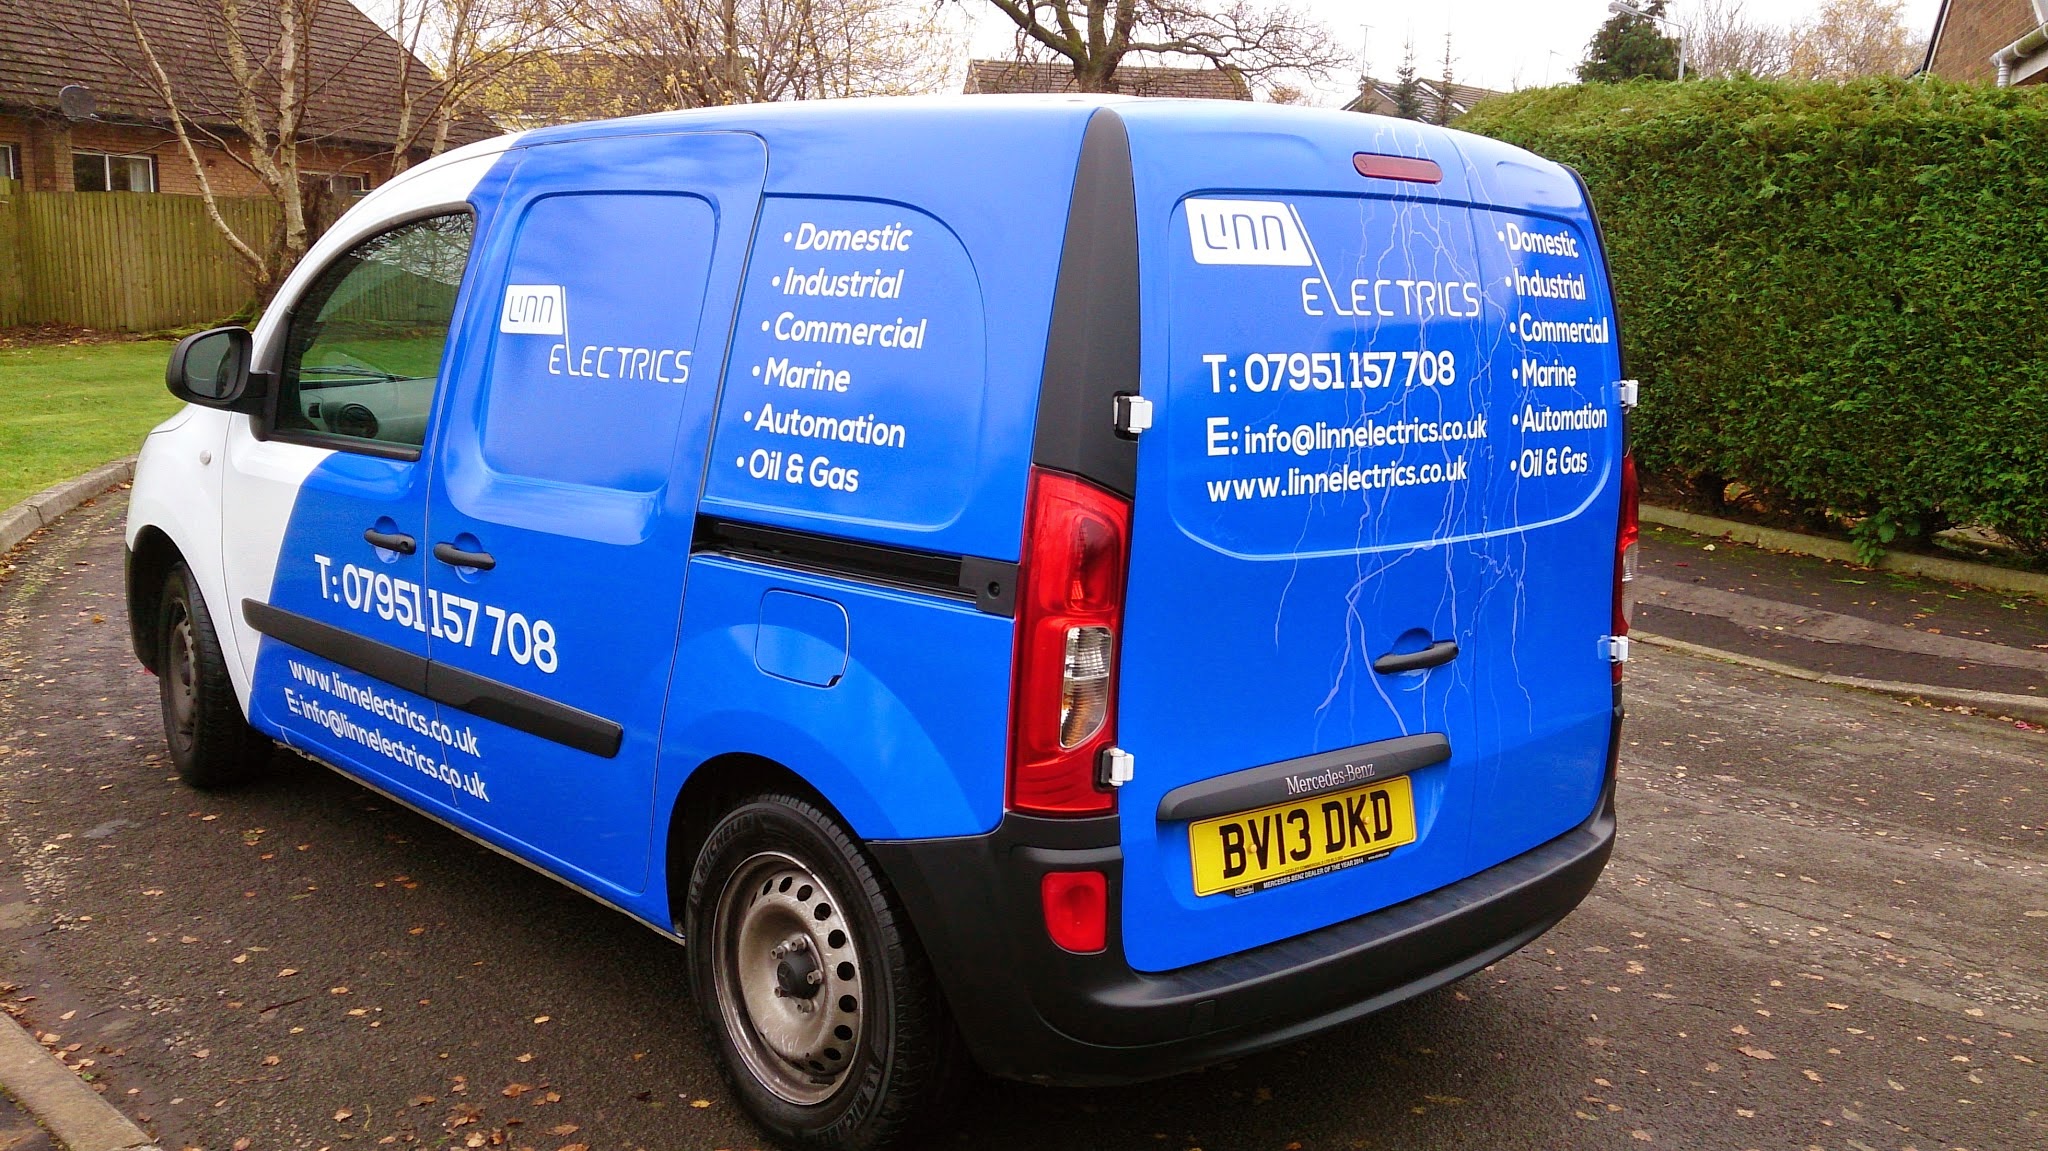 Promote your business on the road with our high quality vehicle graphics, v...